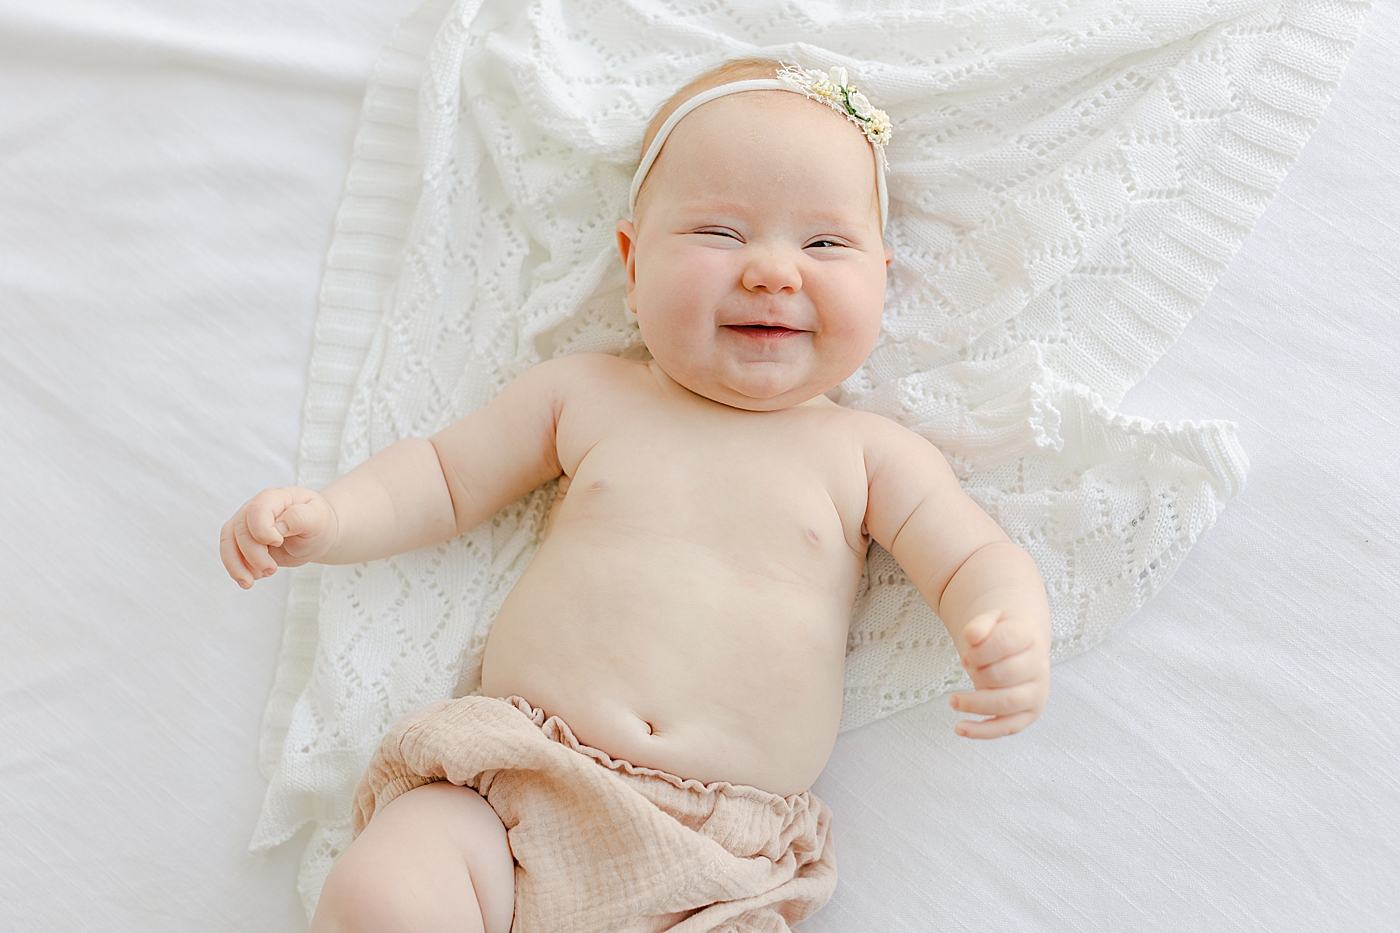 Smiling baby girl in pink bloomers | Image by Sana Ahmed Photography